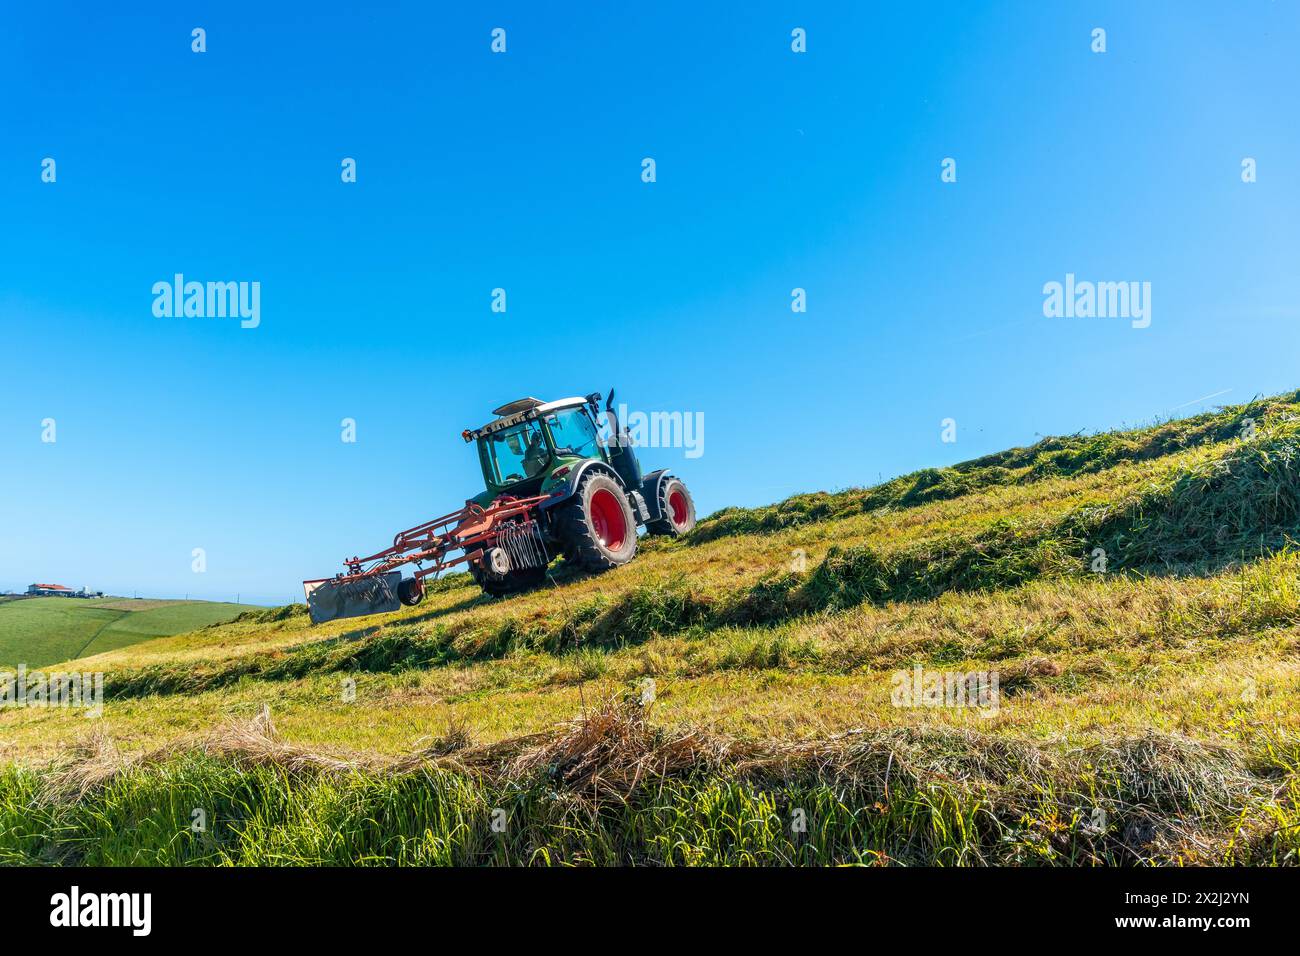 A tractor is driving down a hillside, plowing the grass. The sky is clear and blue, and the sun is shining brightly. The scene is peaceful and Stock Photo